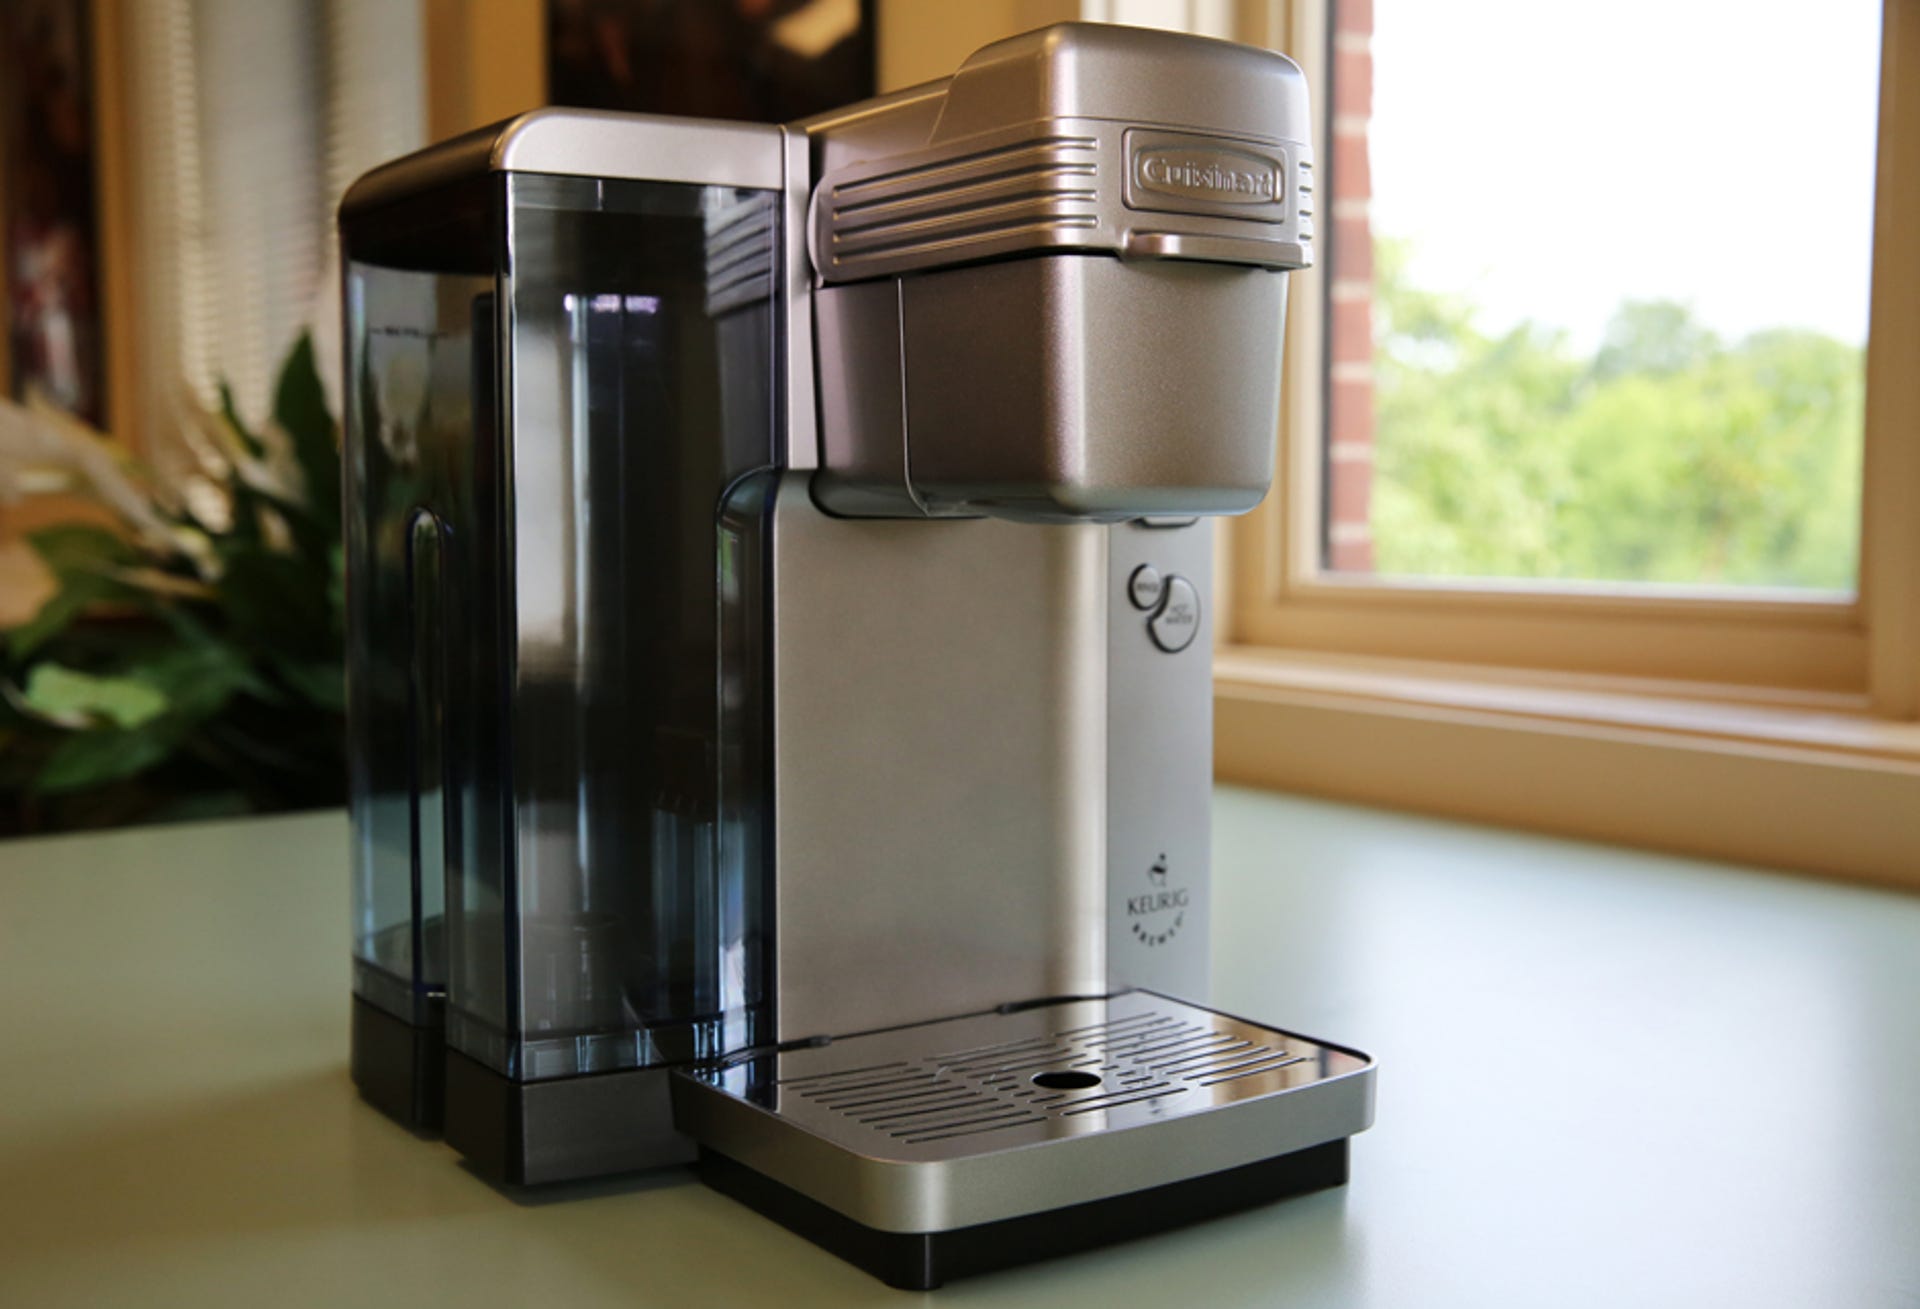 Up close with the Smarter Coffee 2nd Generation grinder-brewer - CNET